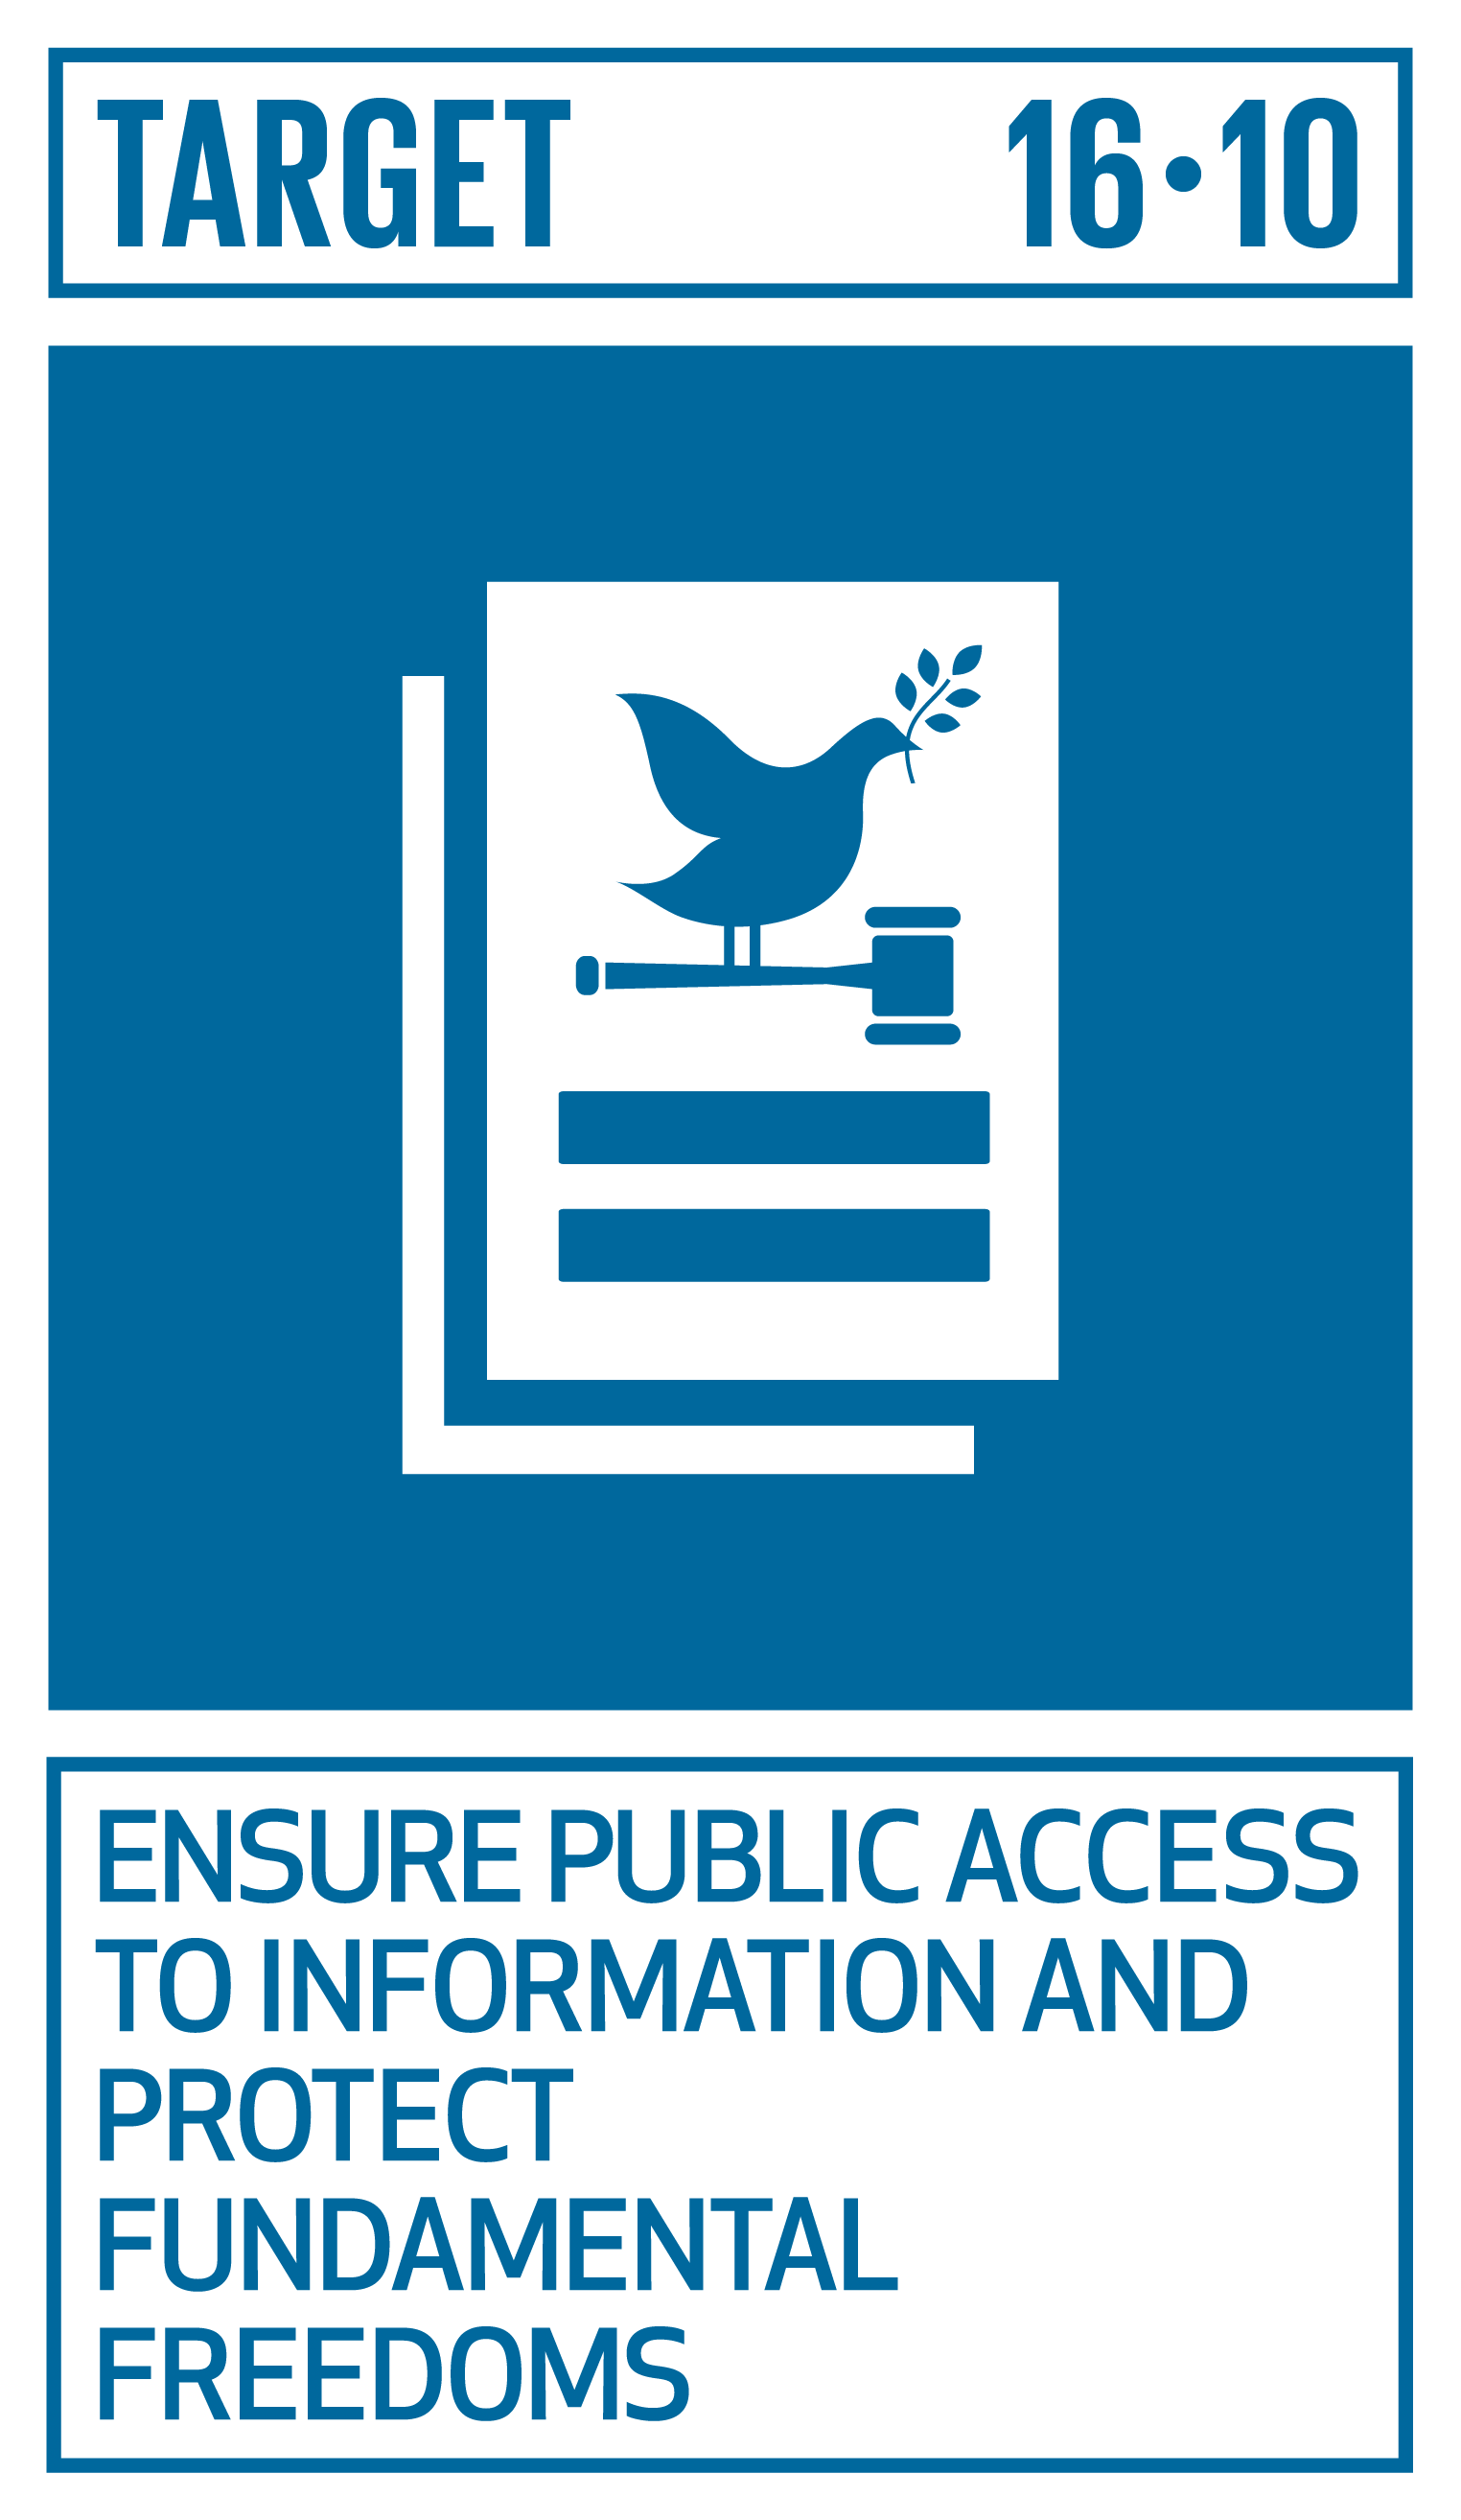 https://ocm.iccrom.org/sdgs/sdg-16-peace-justice-and-strong-institutions/sdg-1610-ensure-public-access-information-and